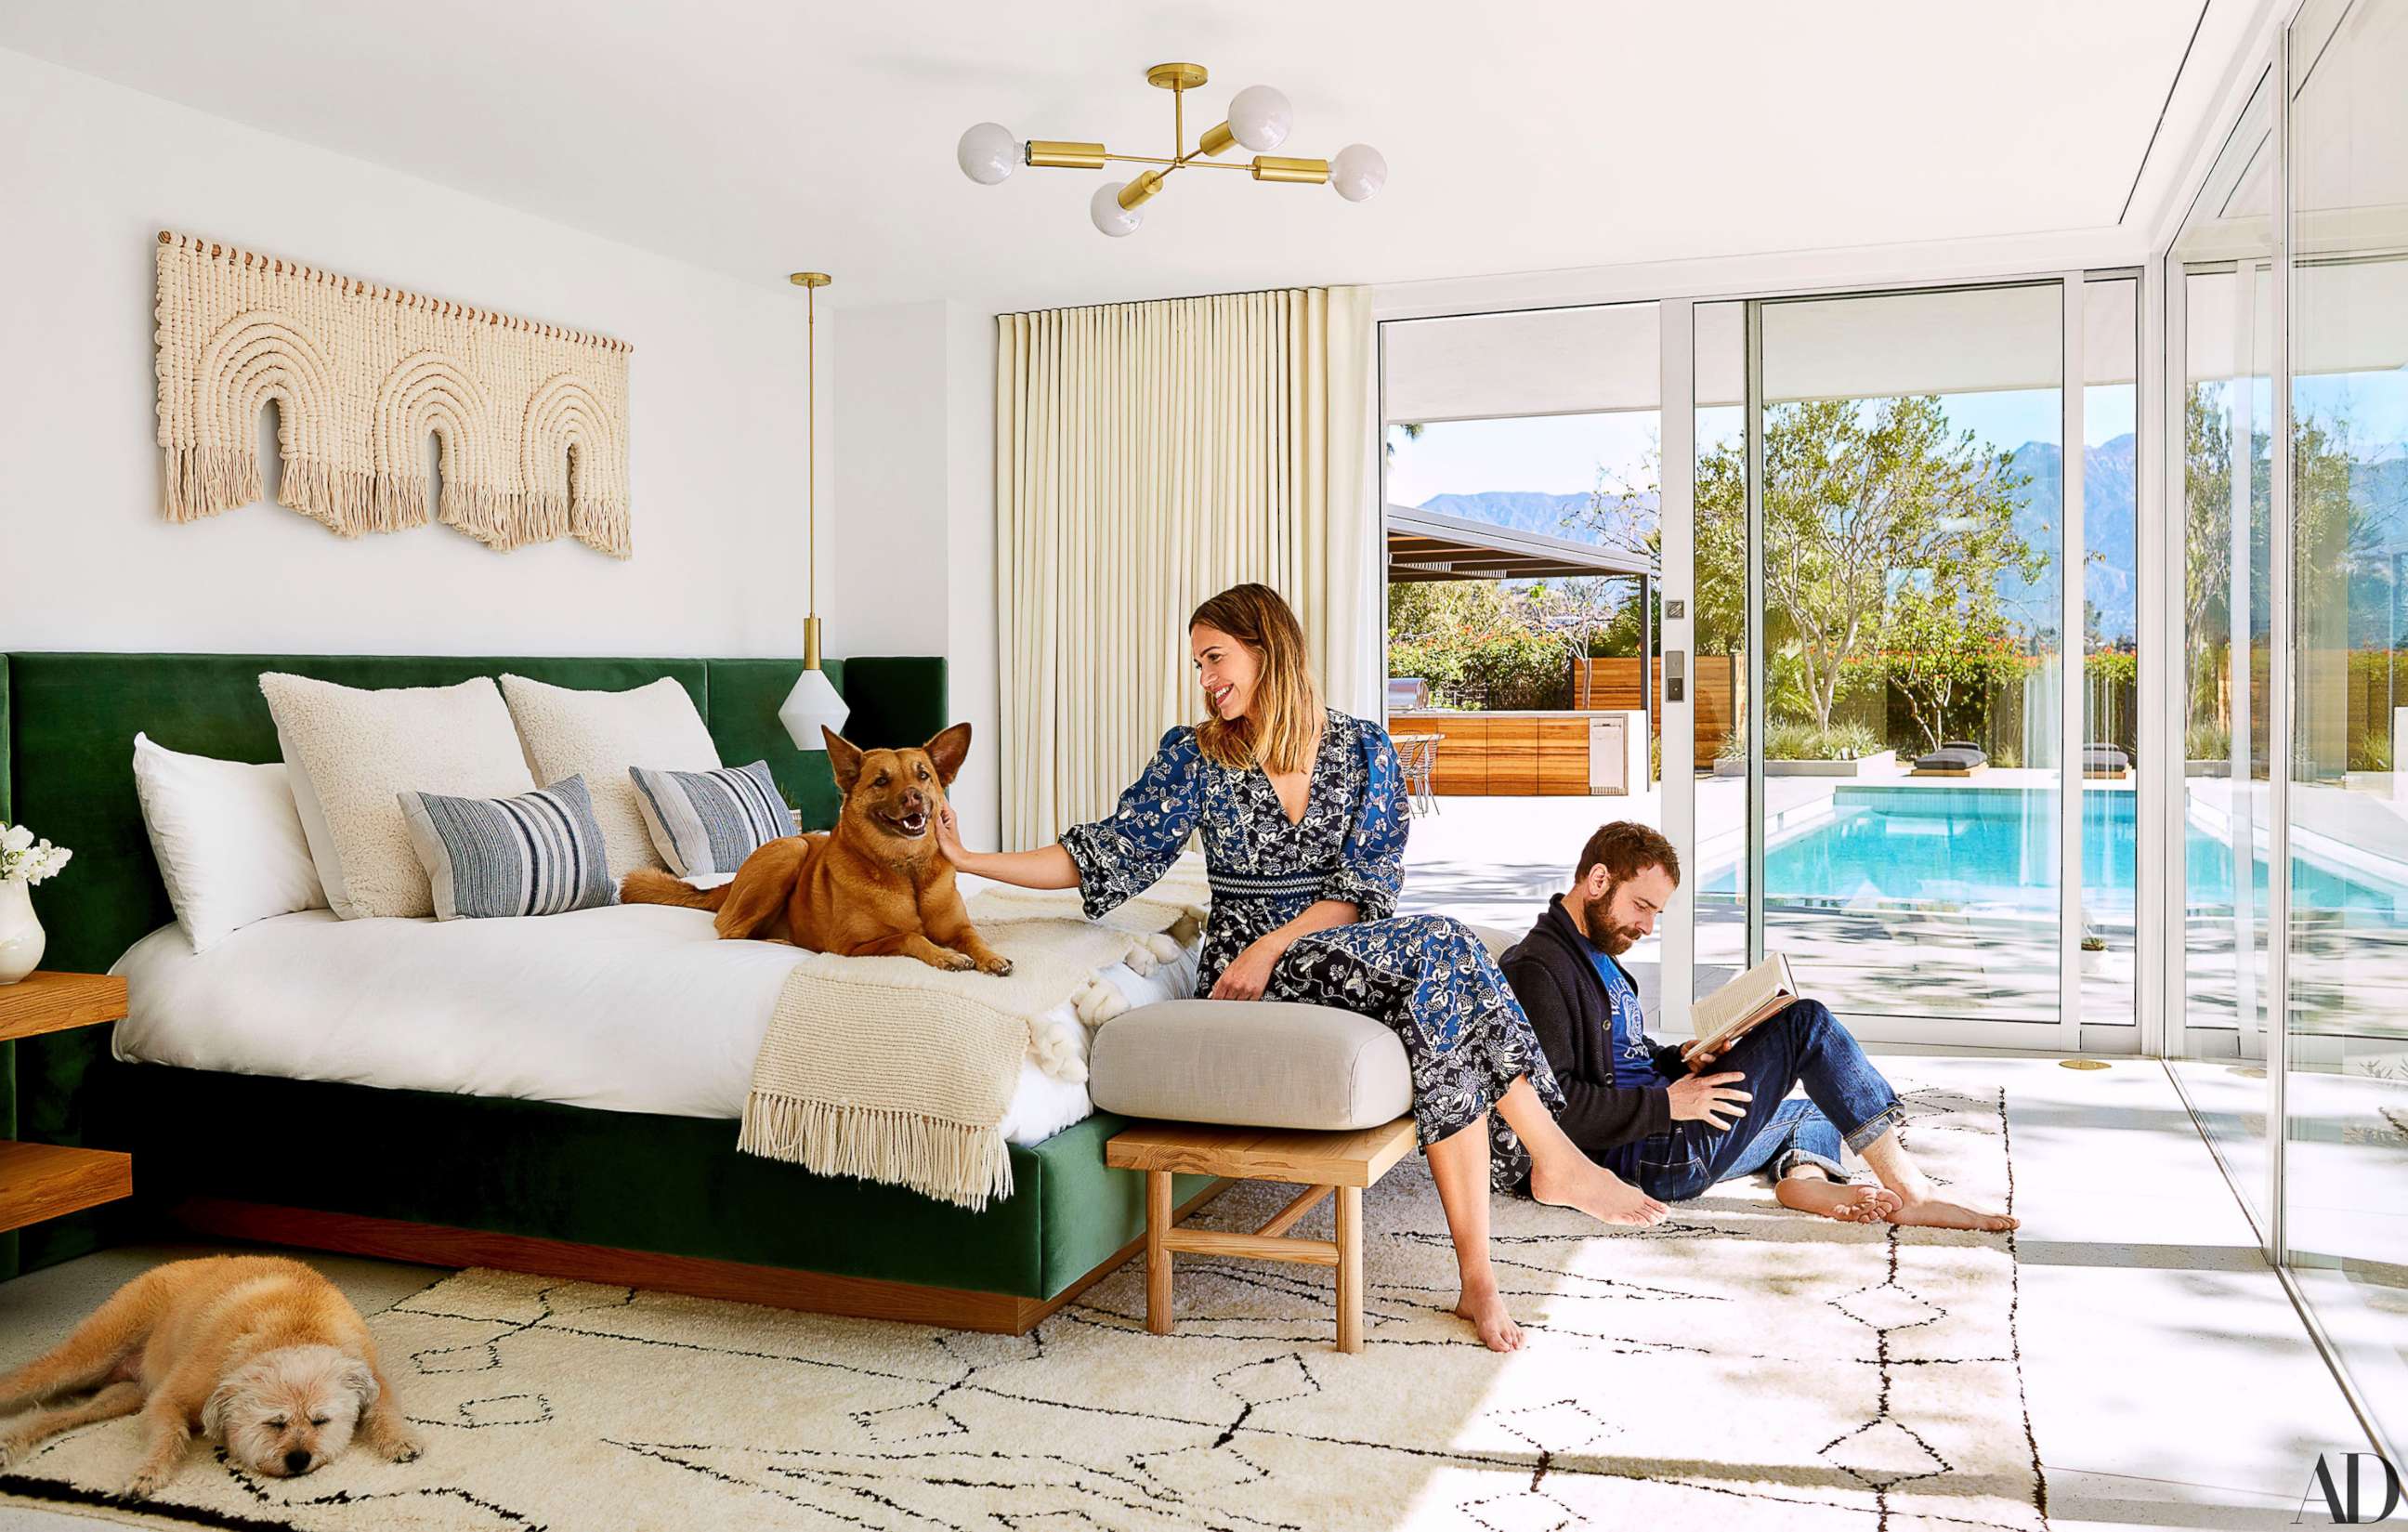 PHOTO: Images of Mandy Moore's house in Pasadena, CA for Architectural Digest June 2018 issue.